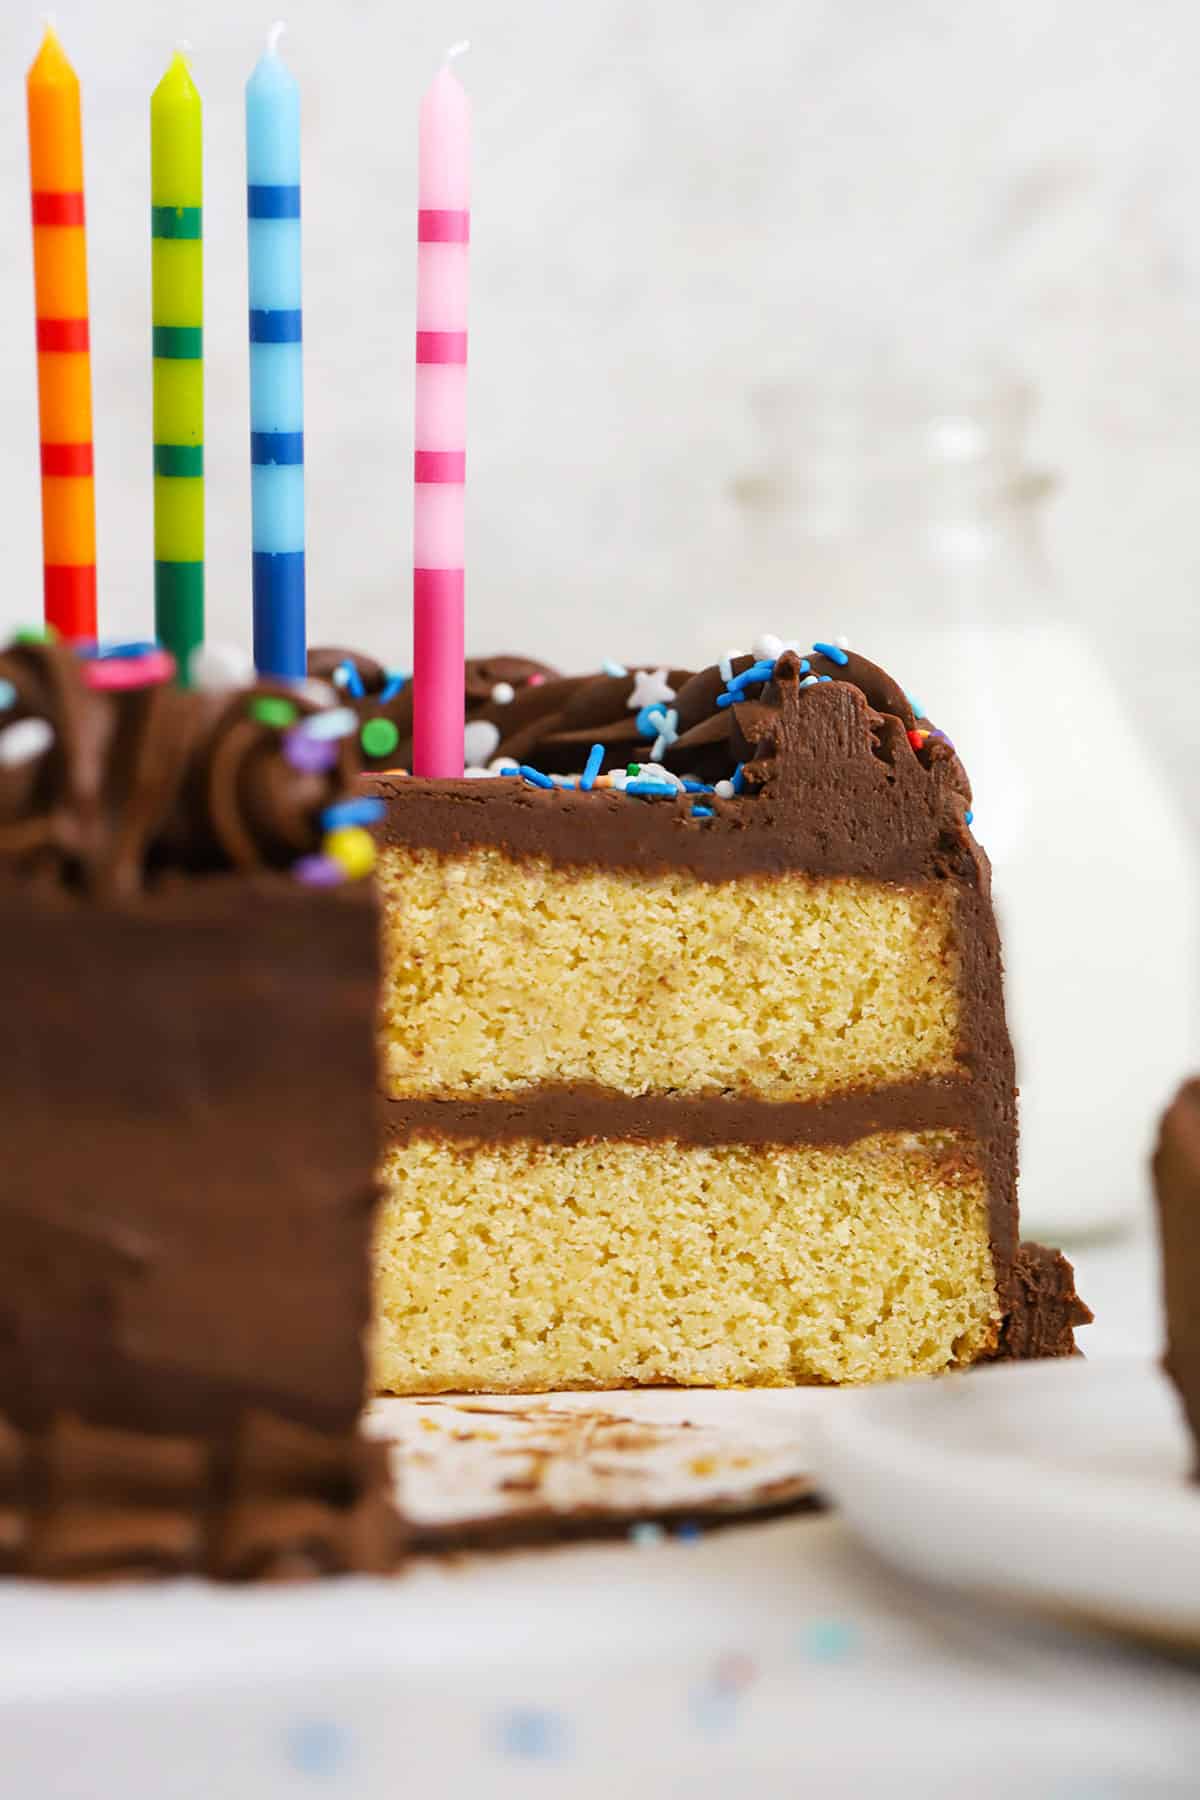 gluten-free yellow cake with chocolate frosting, colorful sprinkles, and colorful striped birthday candles